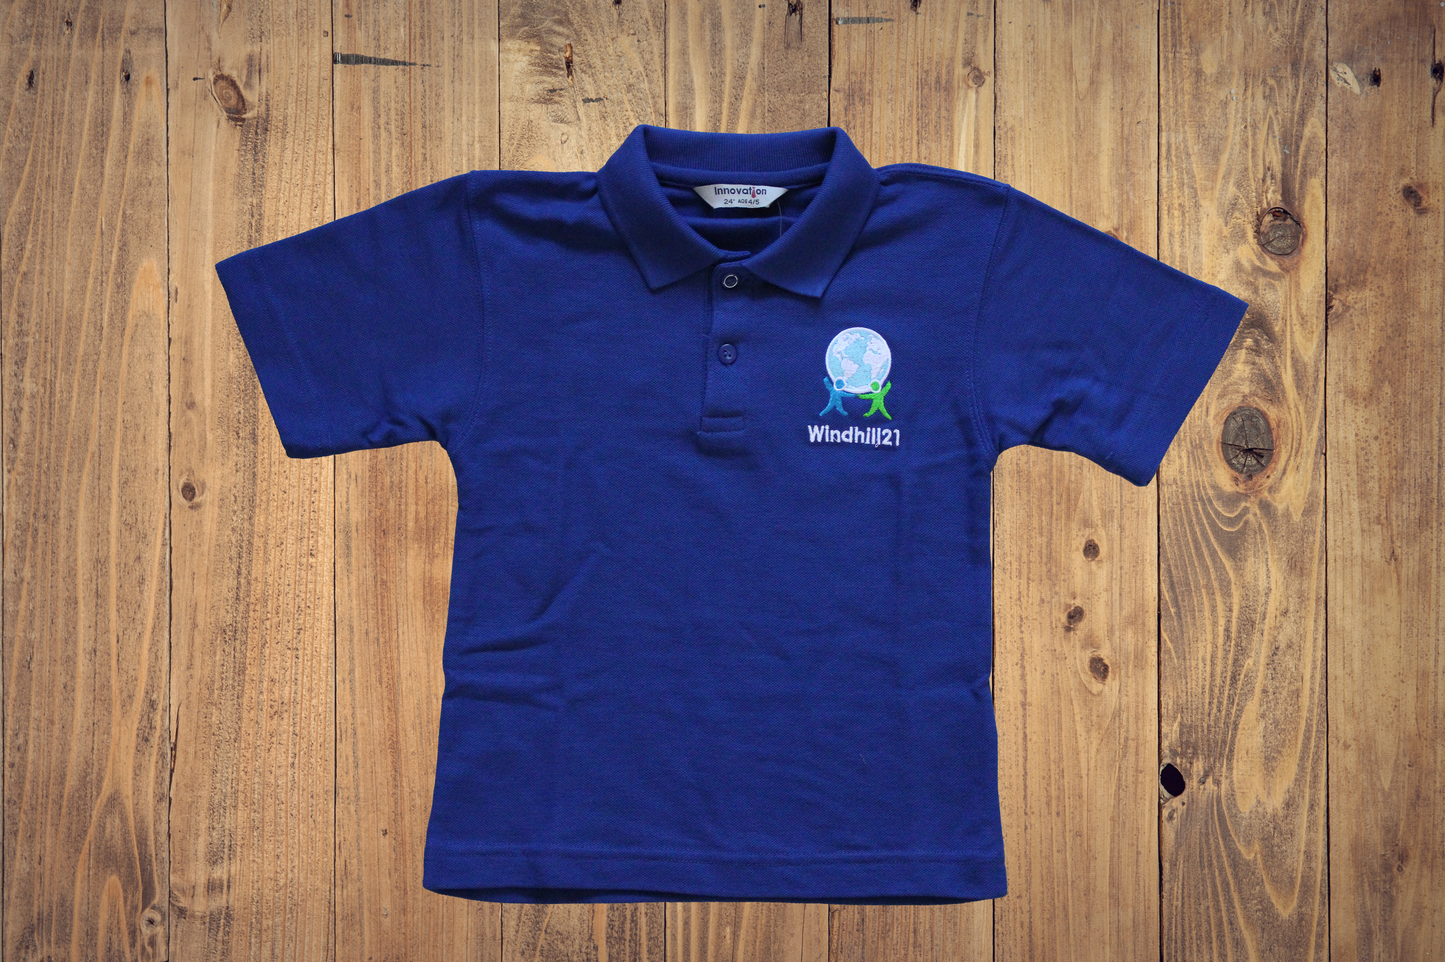 Windhill21 Polo Shirt